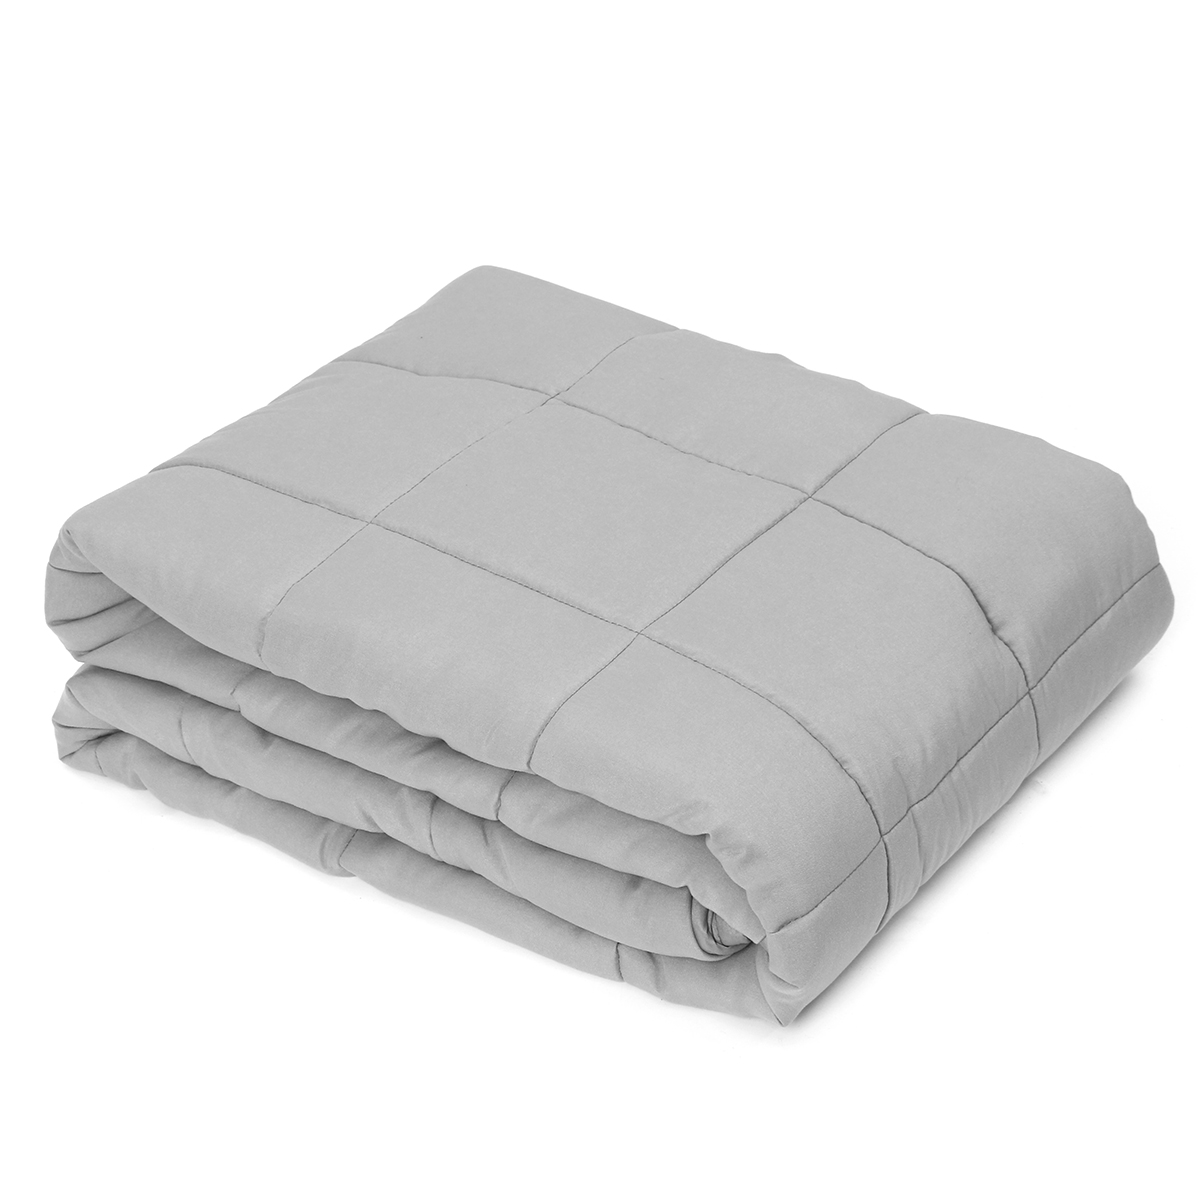 

48x72'' Queen Size Cotton 12/15/20 lbs Weighted Heavy Blanket Sensory Cure Deep Sleep Decompression Blankets for Adult